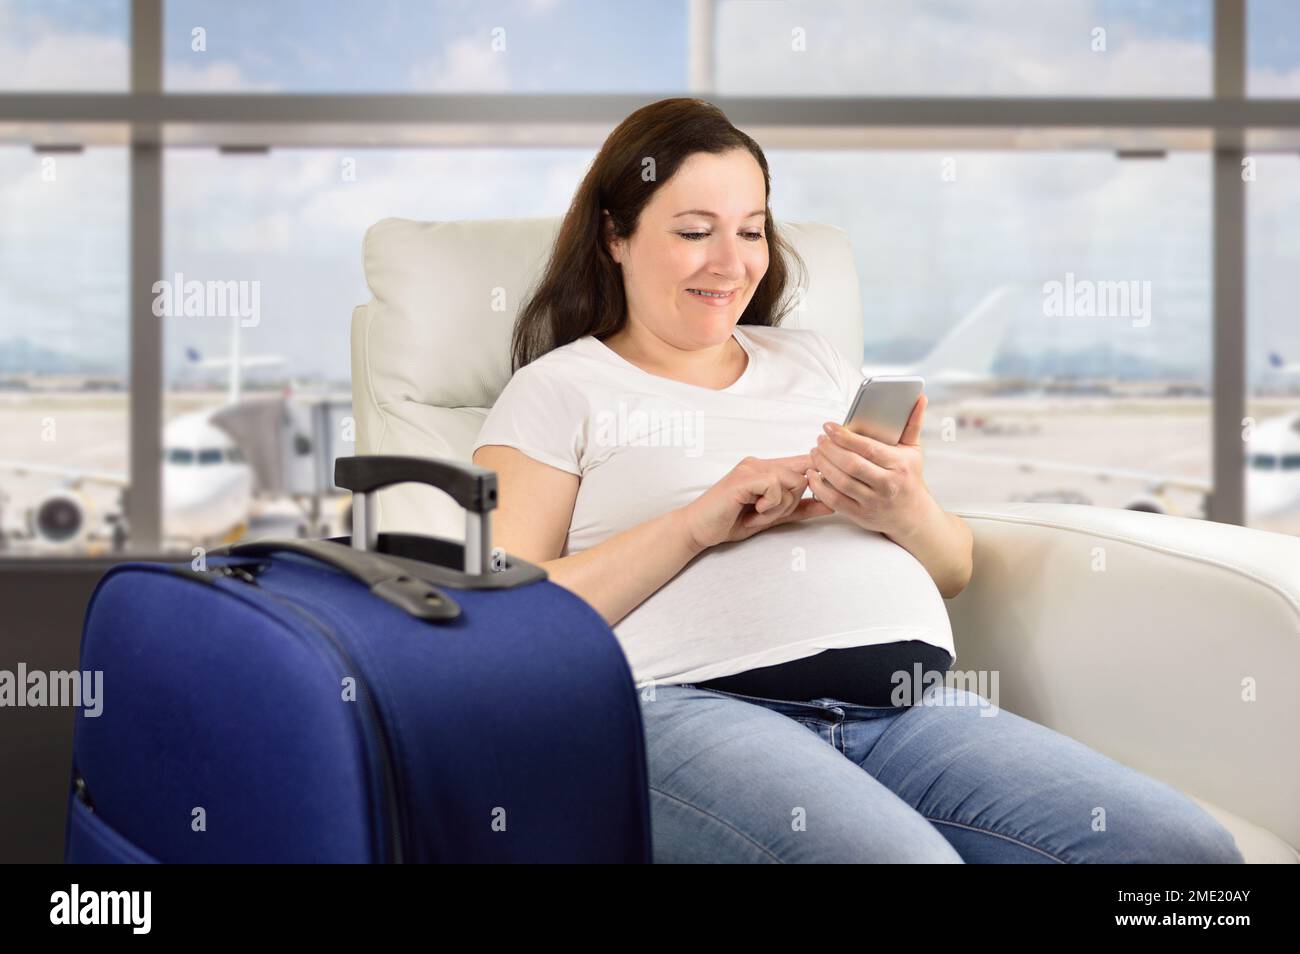 Pregnant woman texting with a smart phone and waiting for her flight in a VIP area and VIP zone aiport Stock Photo